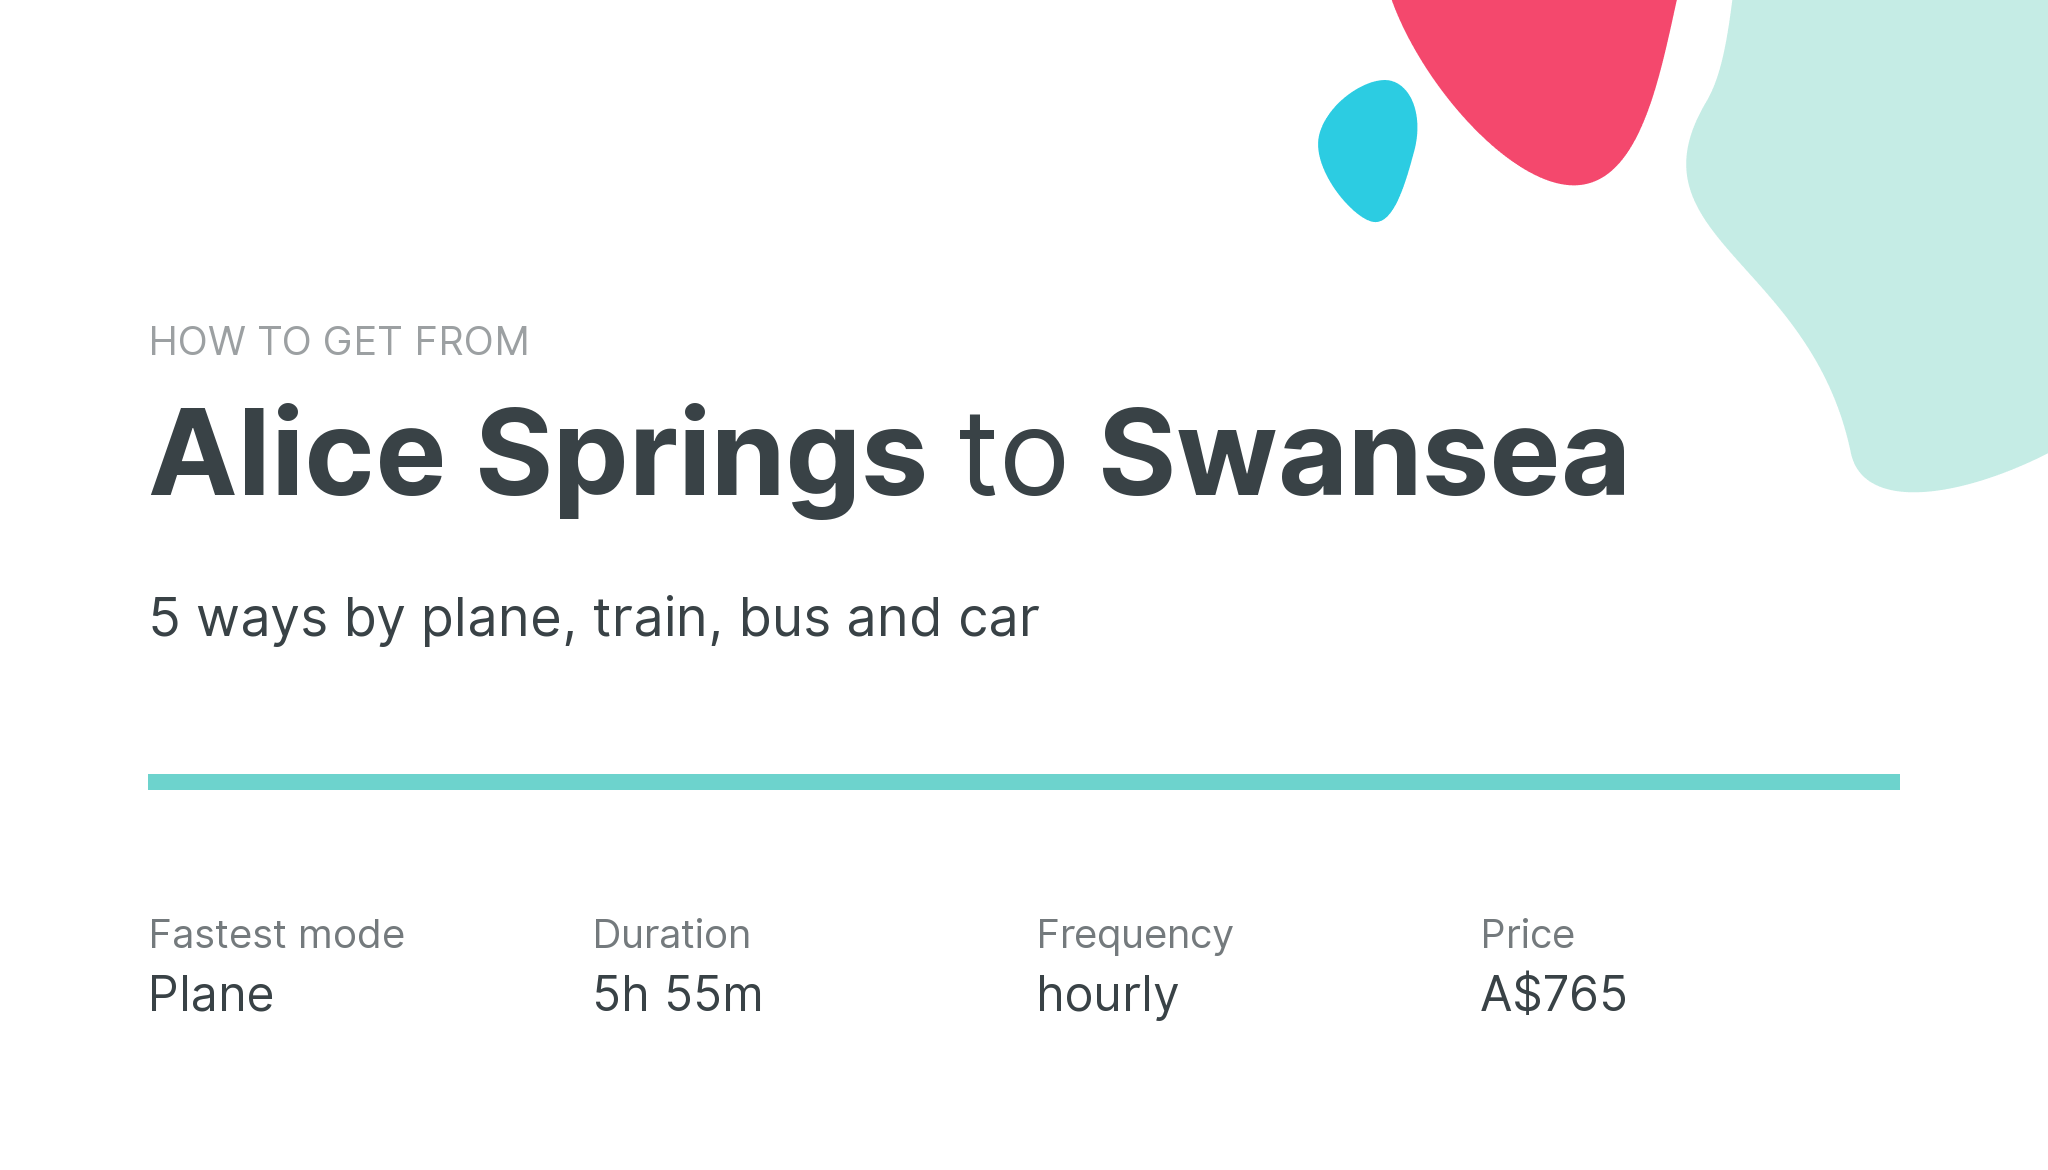 How do I get from Alice Springs to Swansea